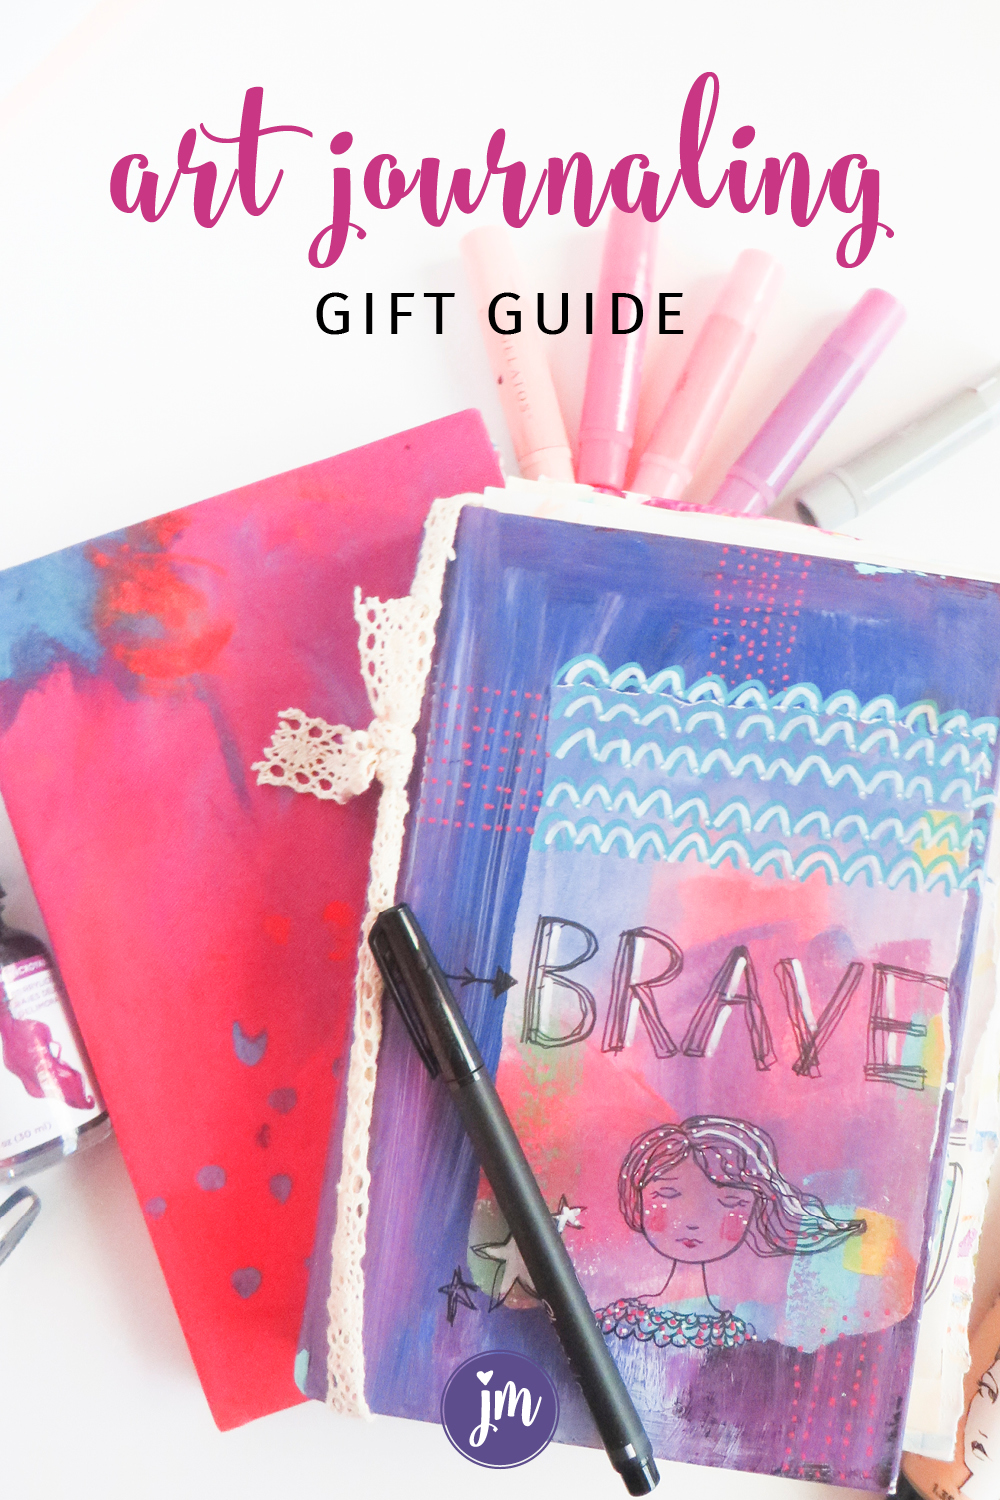 Yes! I am new to art journaling and this guide really helped me. Now I'm inspired to make some art journal love gifts for my friends for Christmas!